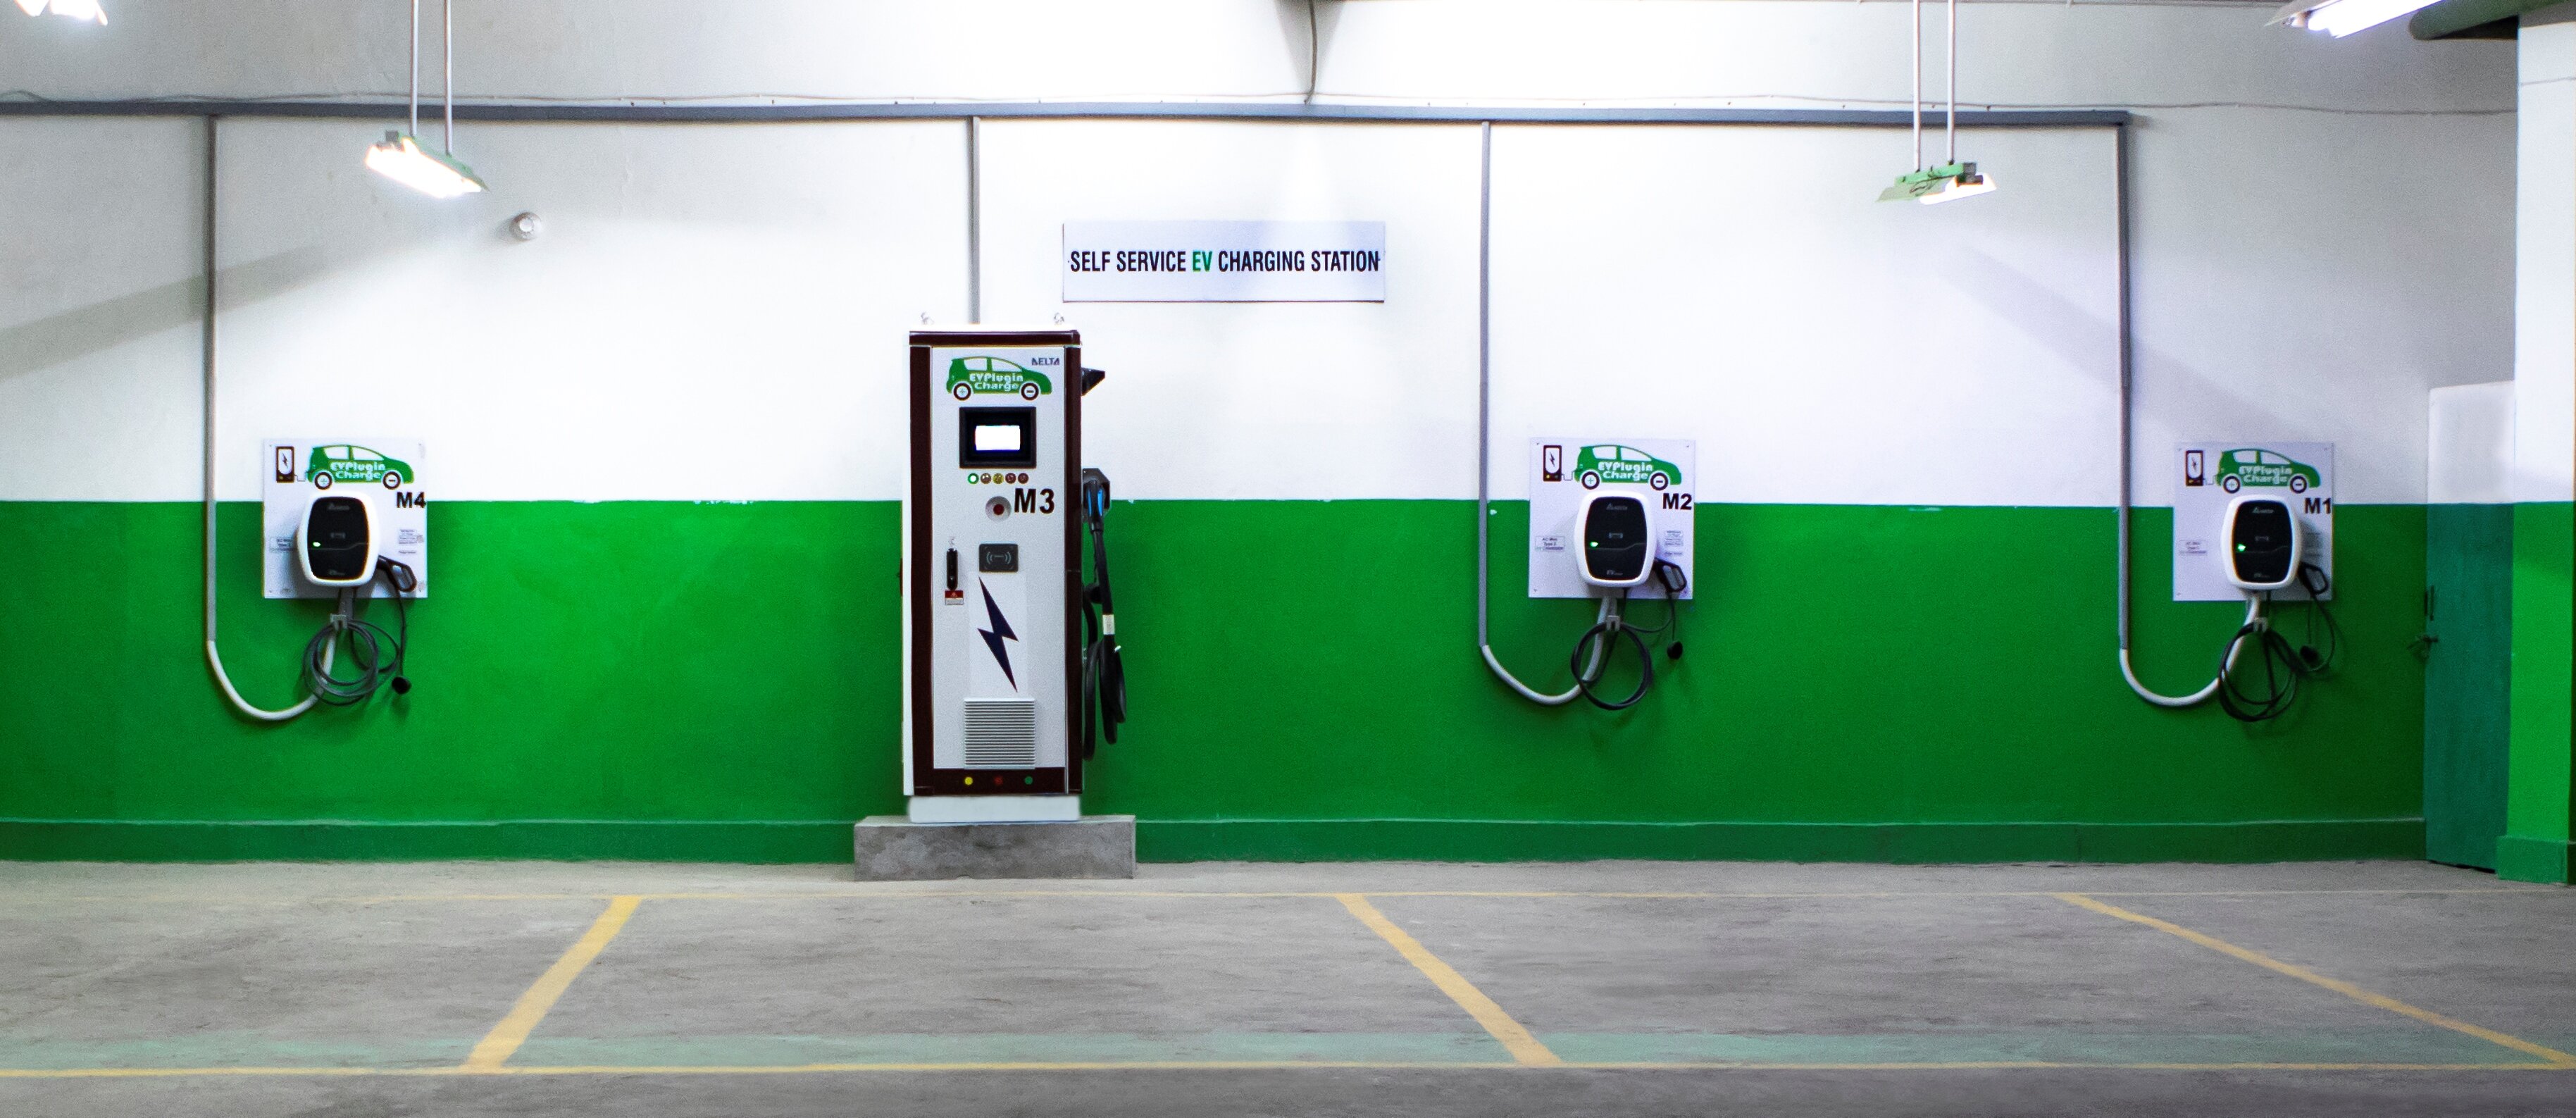 Electric Vehicle Ev Car Charging Station In Delhi India,Small Romantic Master Bedroom Designs